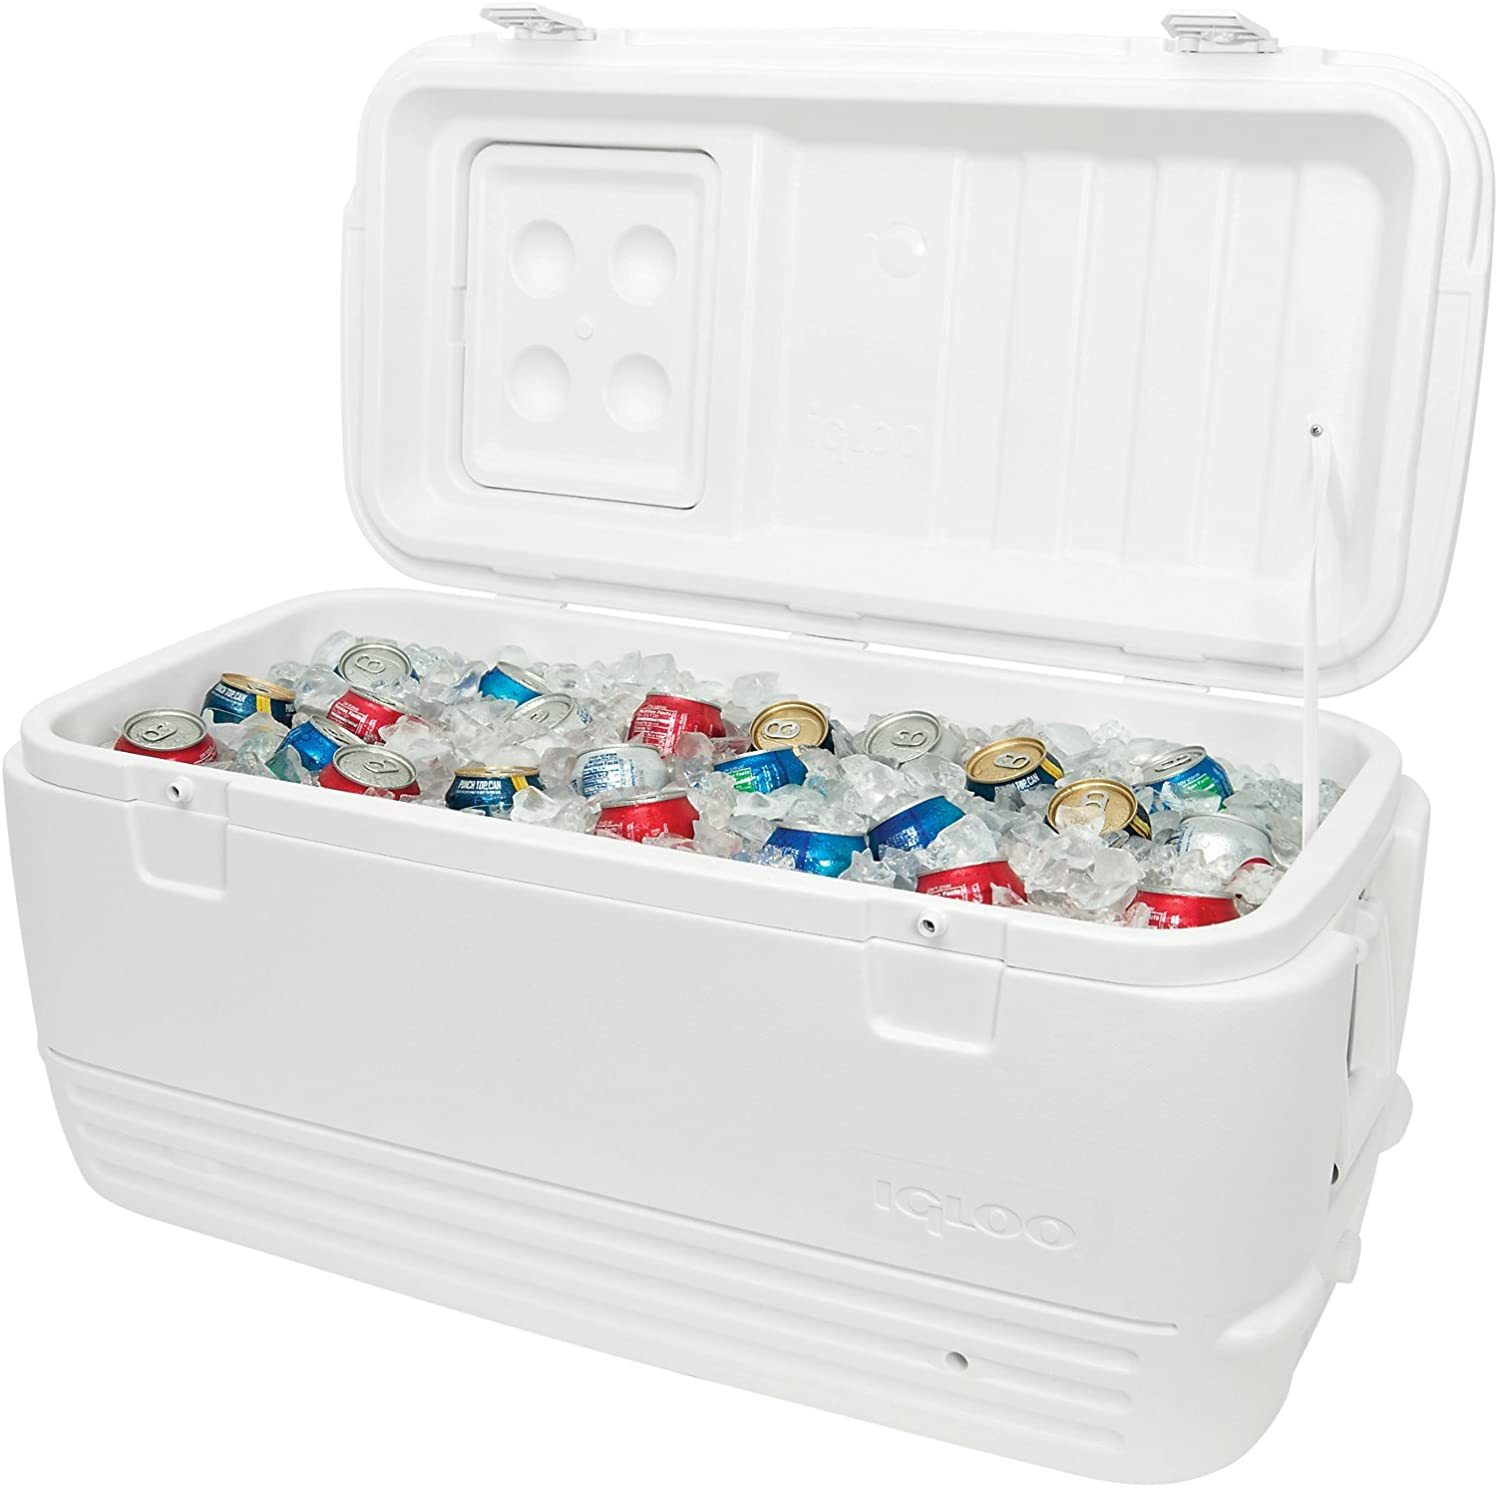 Large Heavy-Duty Cooler Camping Travel Ice Box White - Coolers & Ice Chests